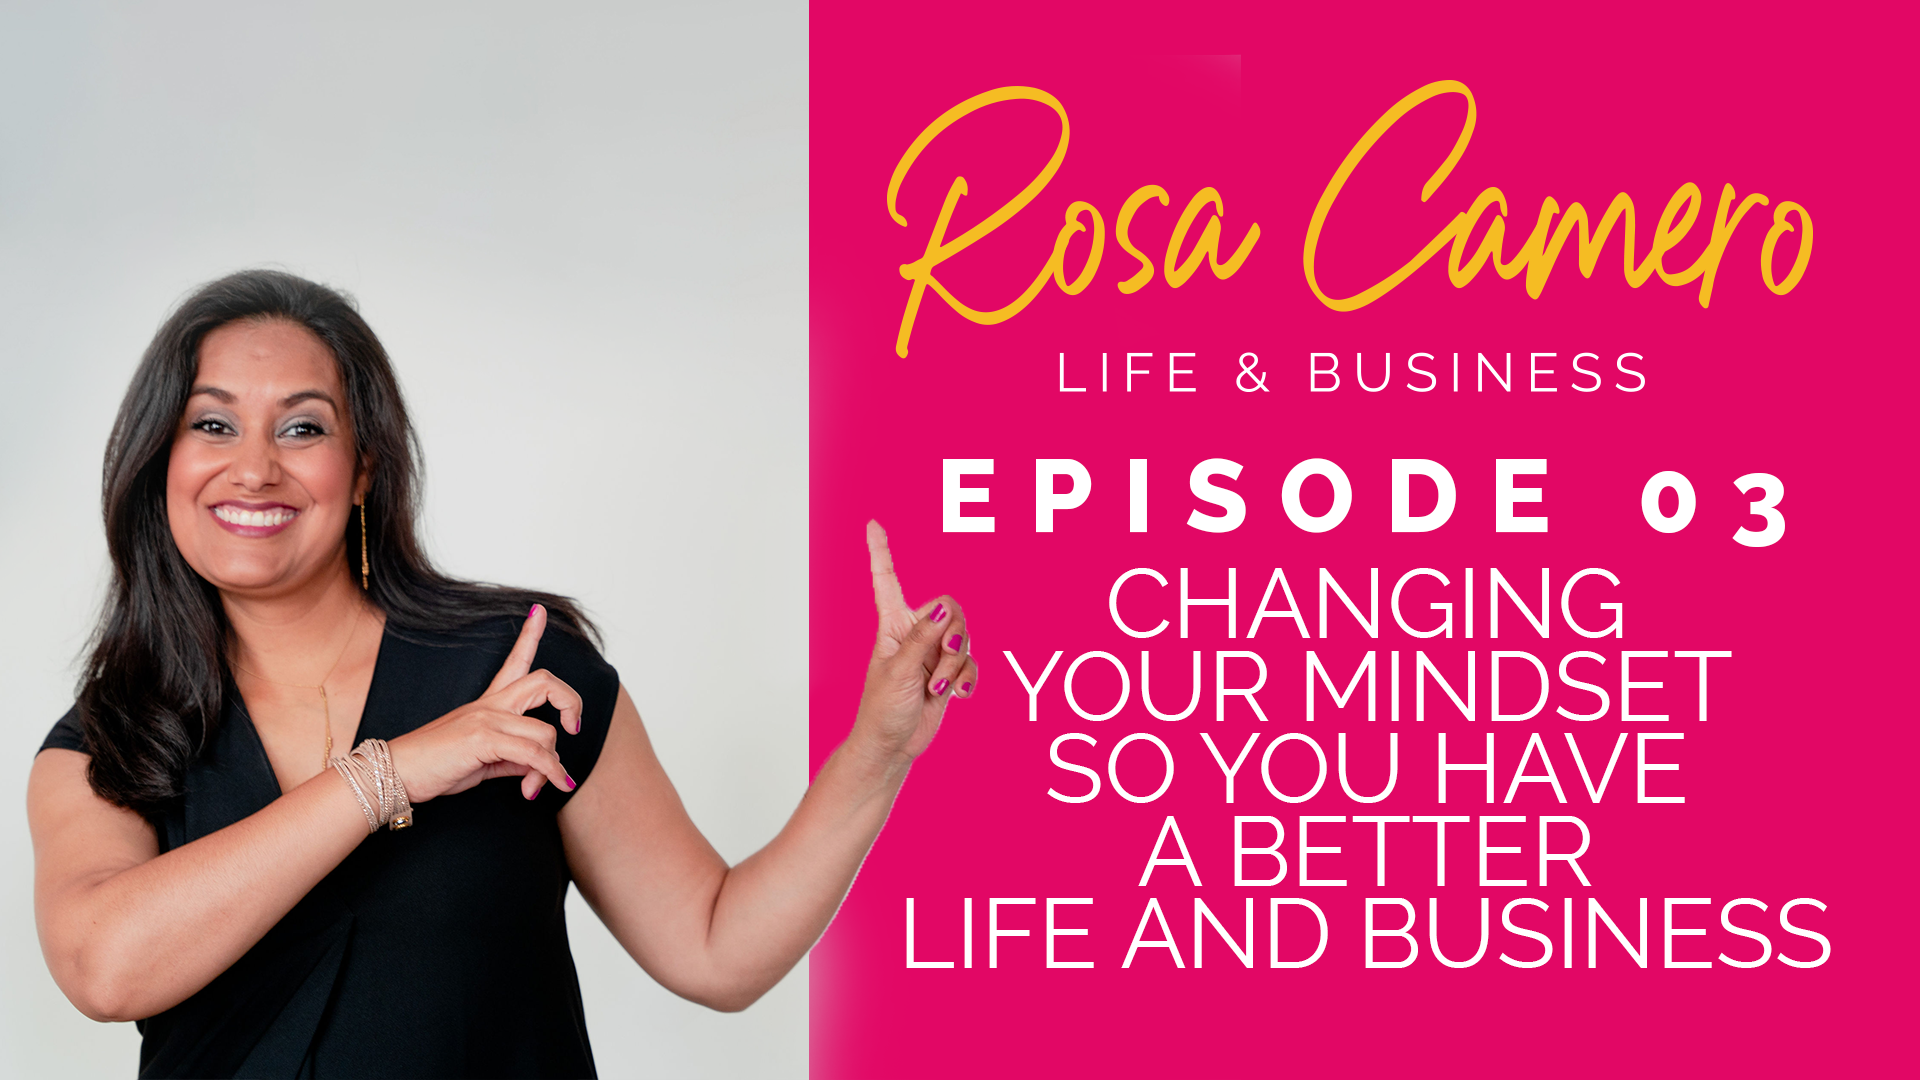 You are currently viewing Life & Business by Rosa Camero  Episode 03: Changing Your Mindset So You Have A Better Life And Business